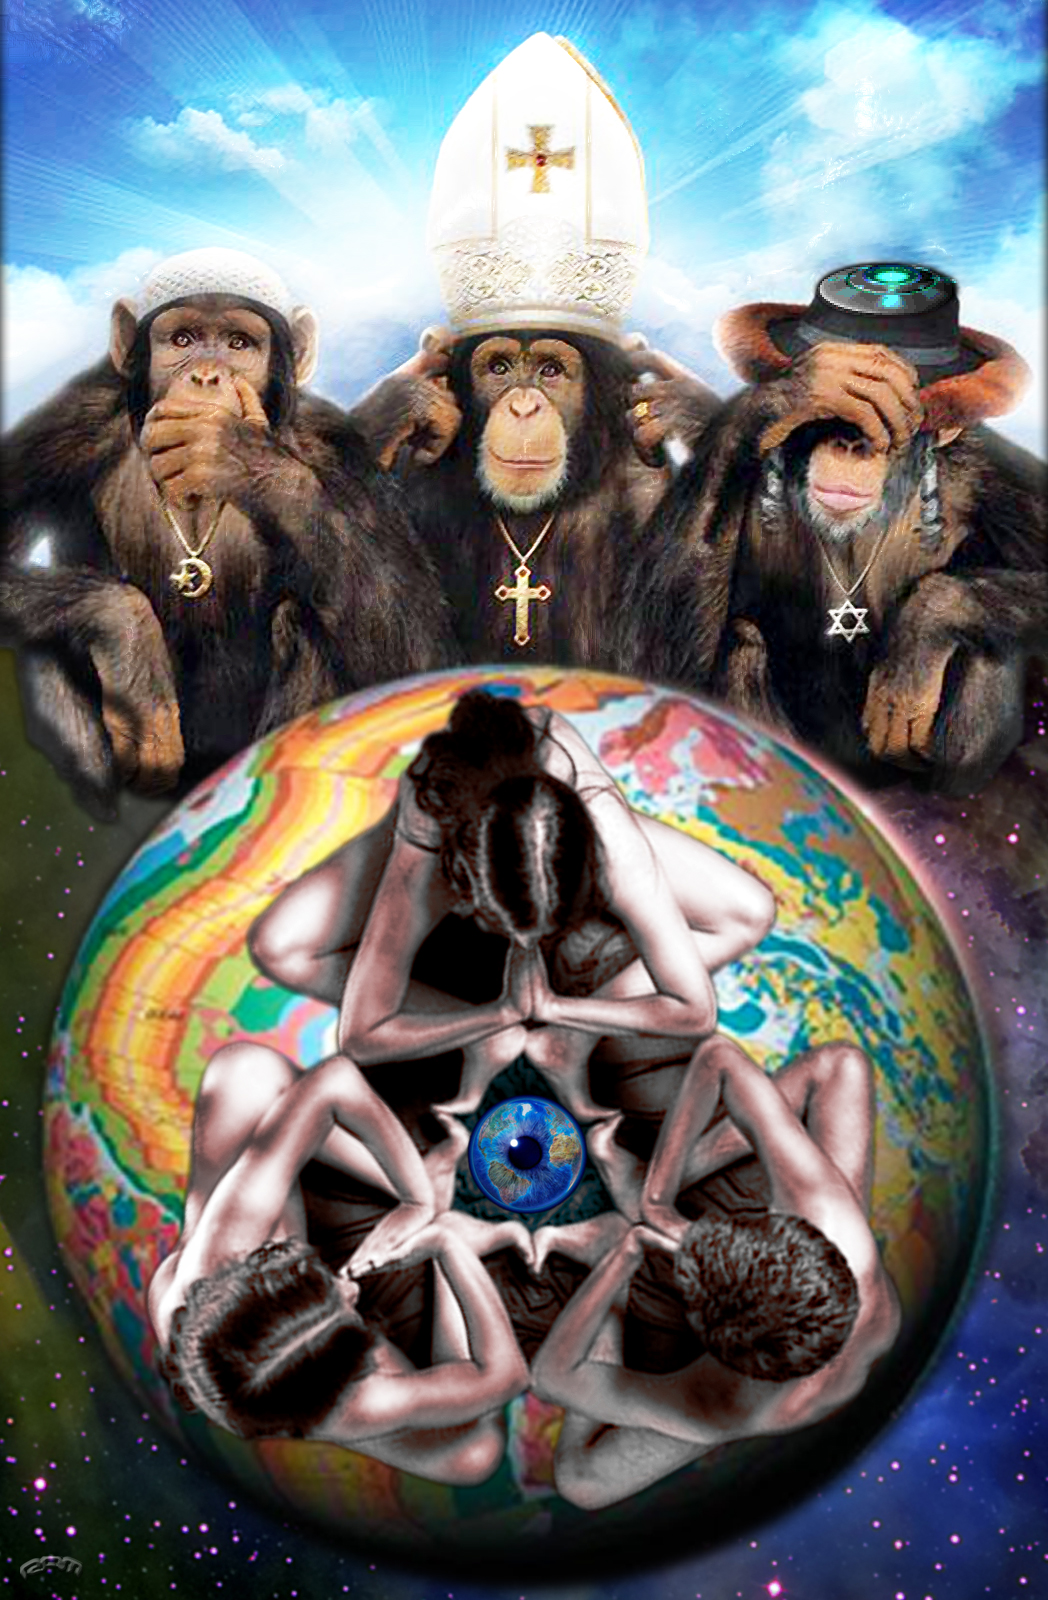 five monkeys are in an intertwined circle in front of a globe